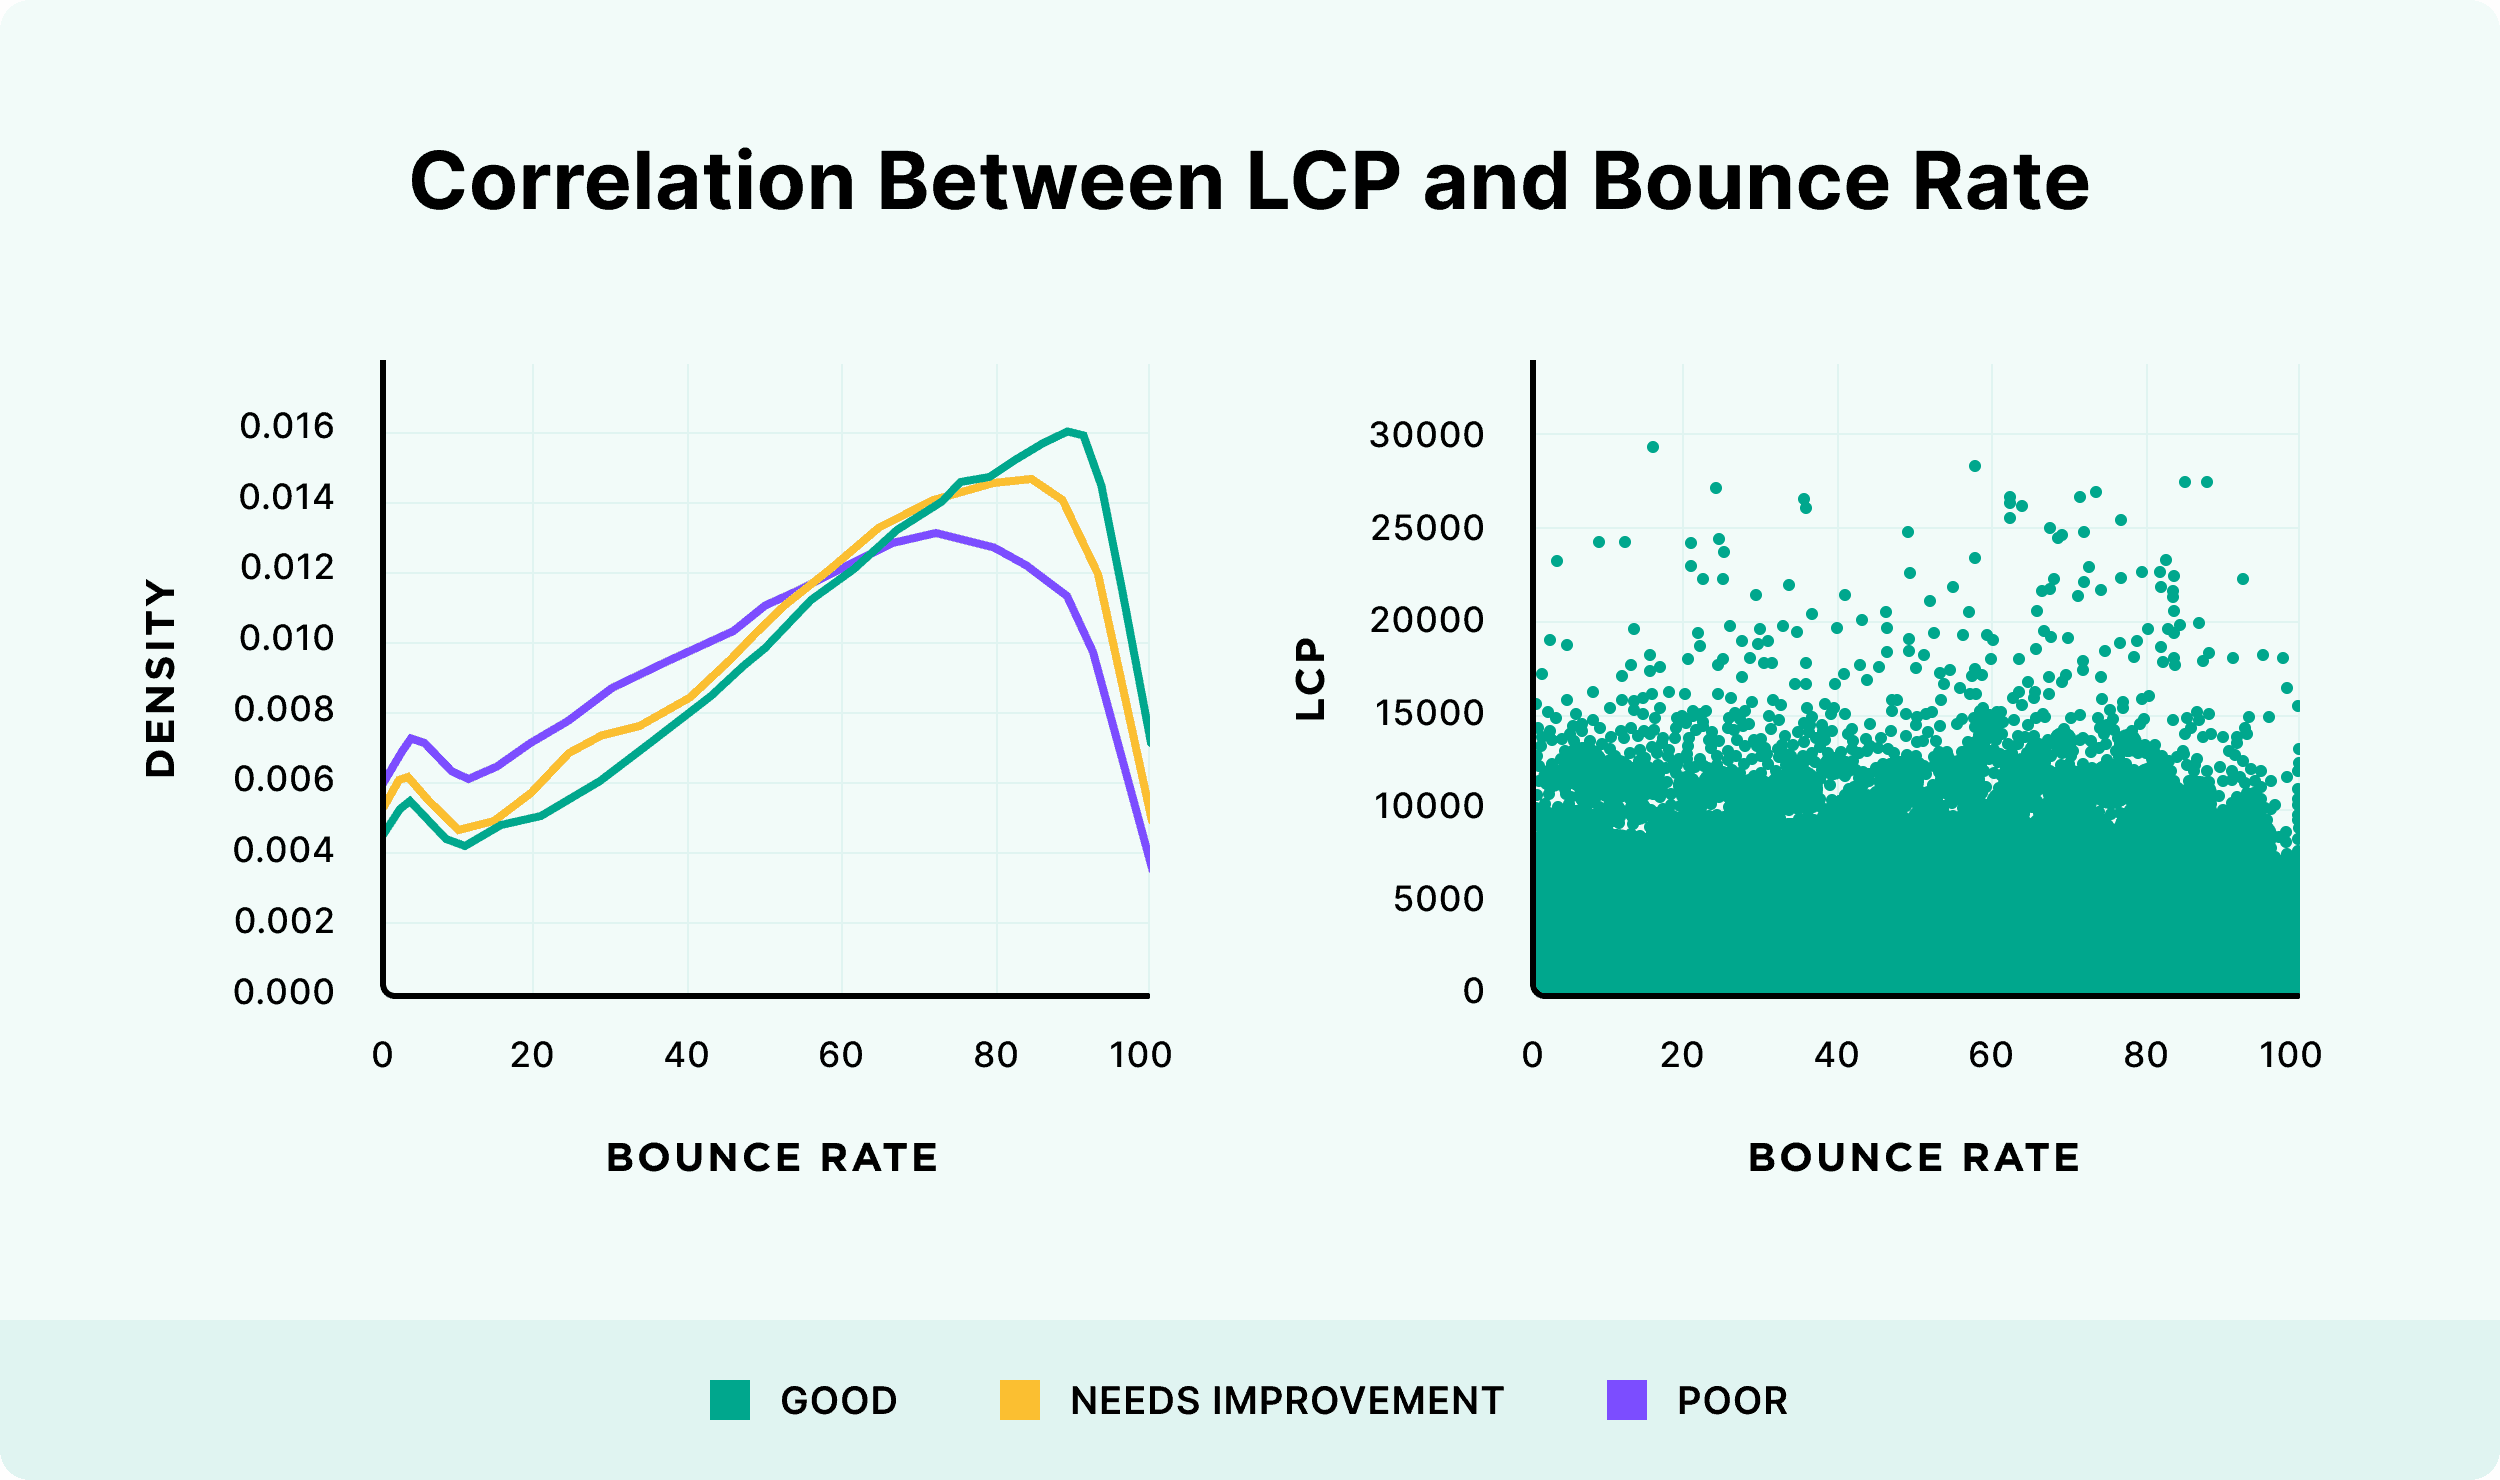 Correlation between LCP and bounce rate